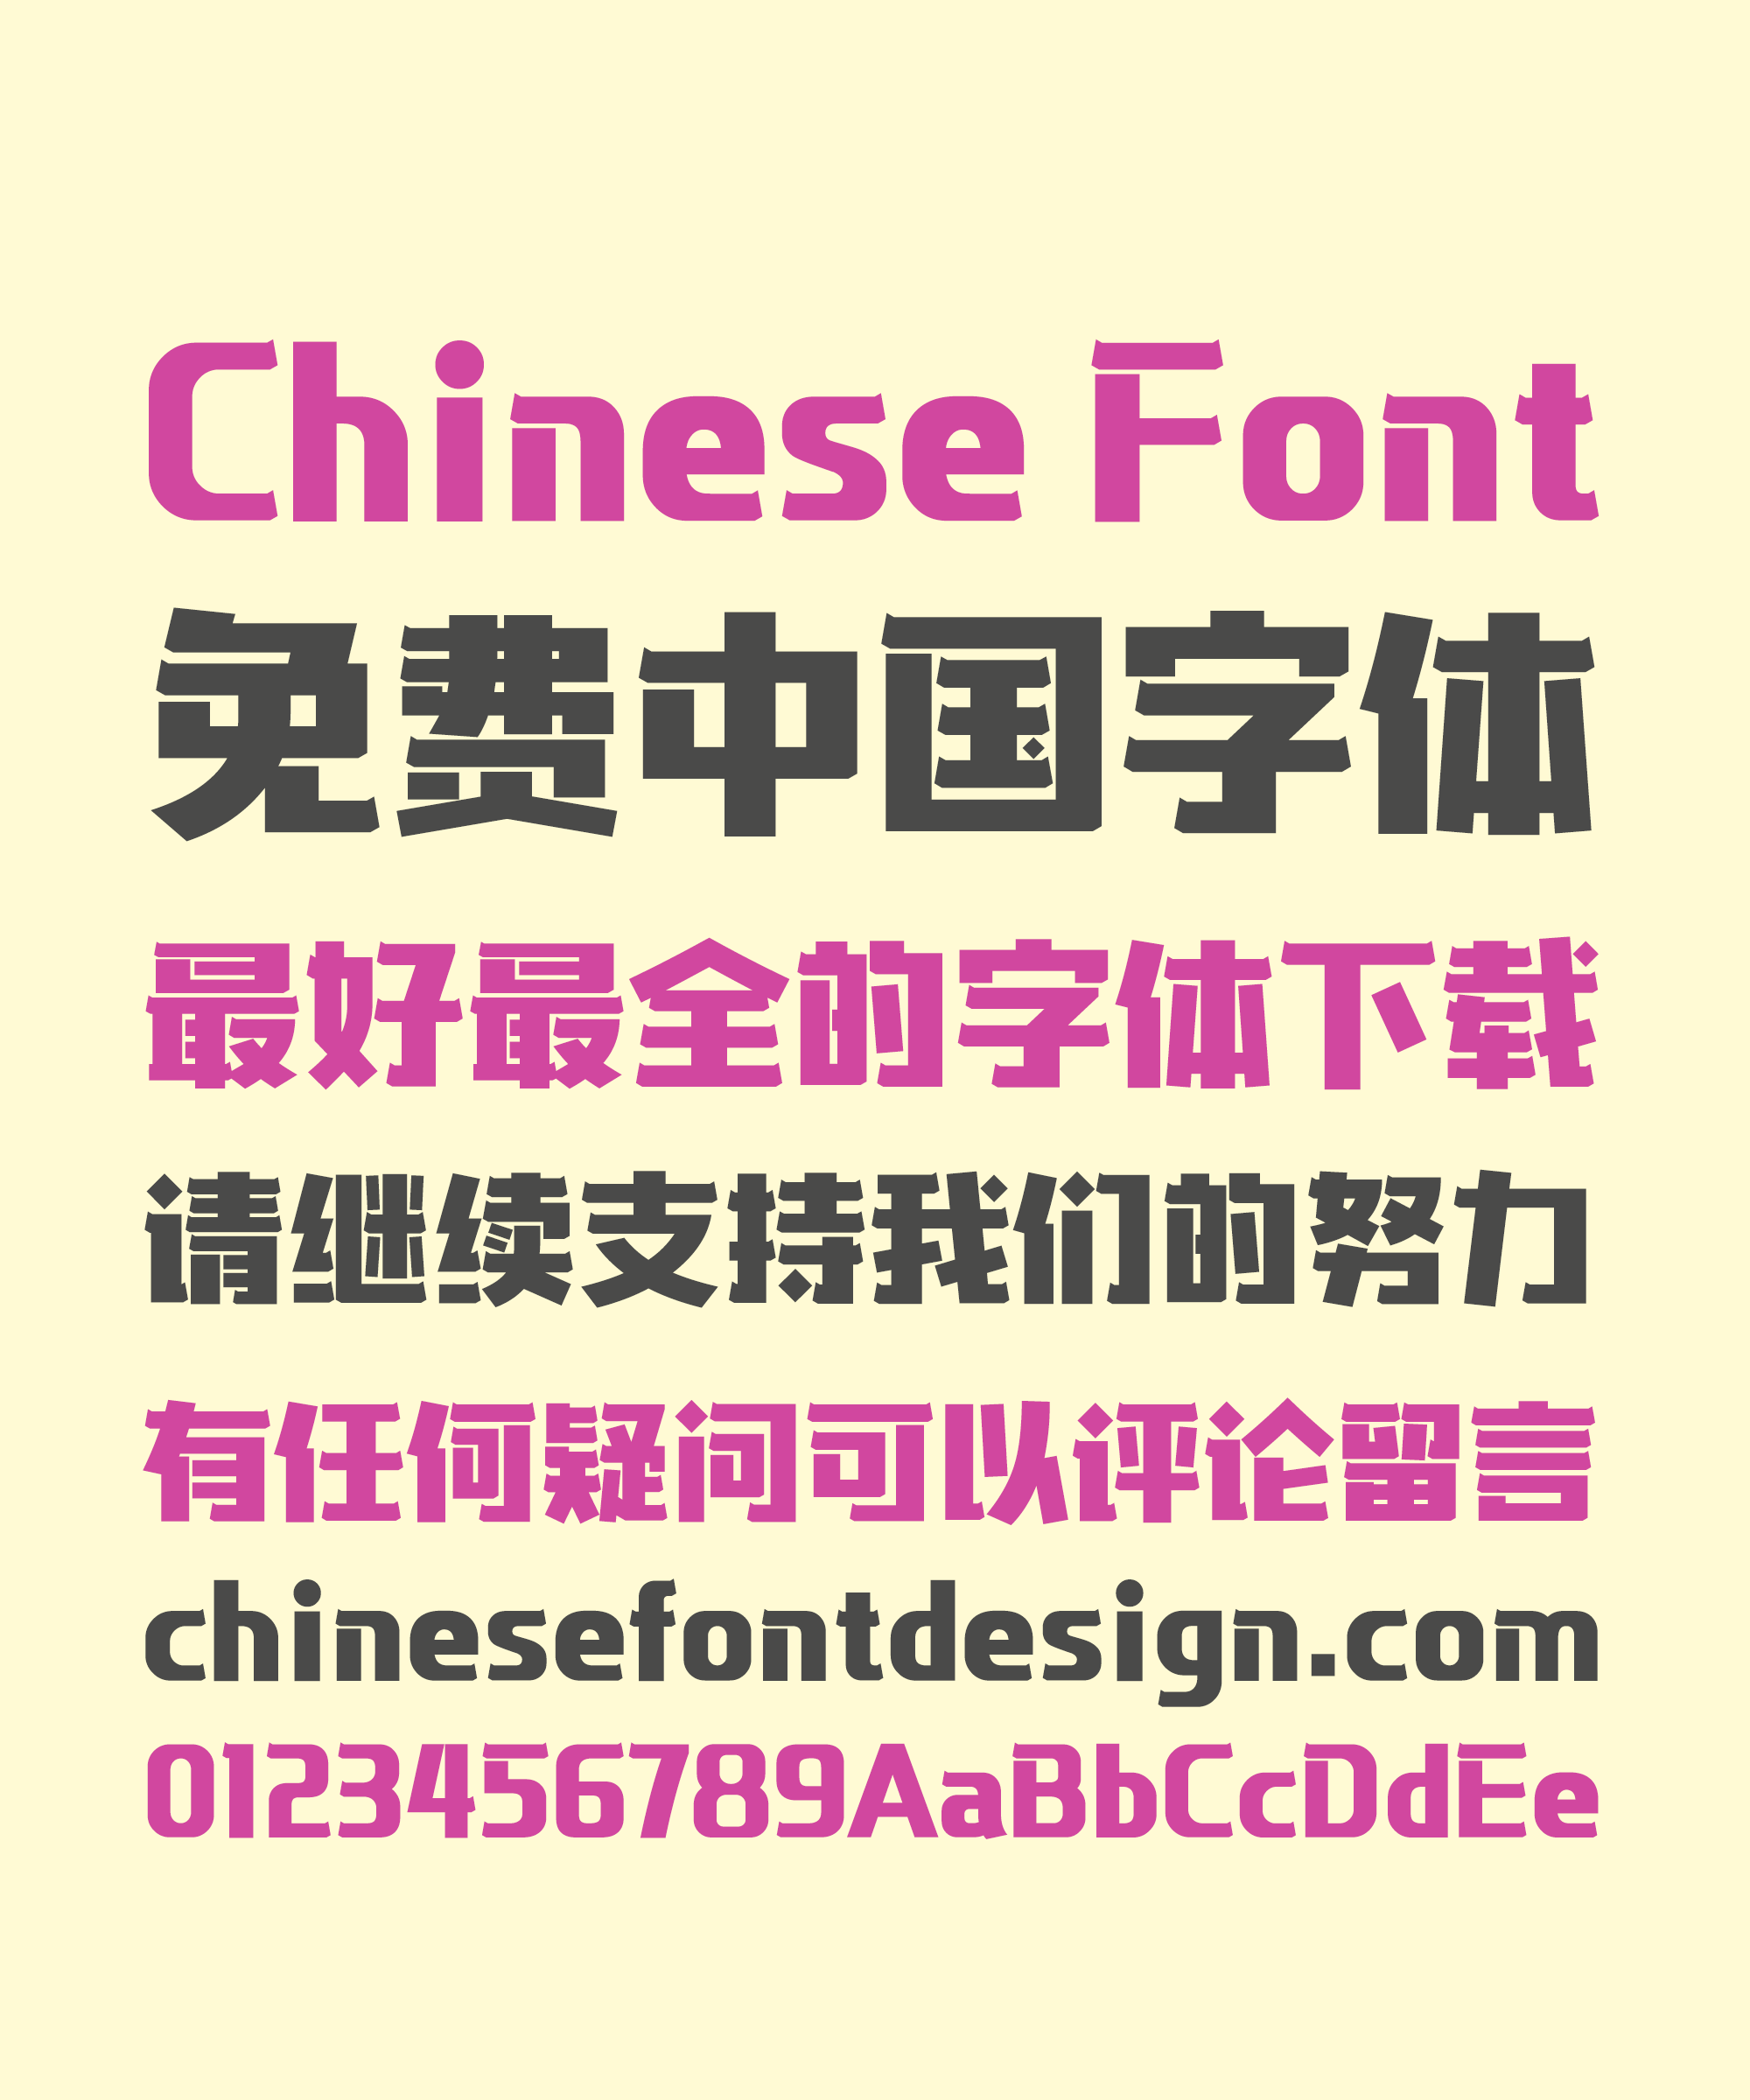 adobe photoshop chinese font download